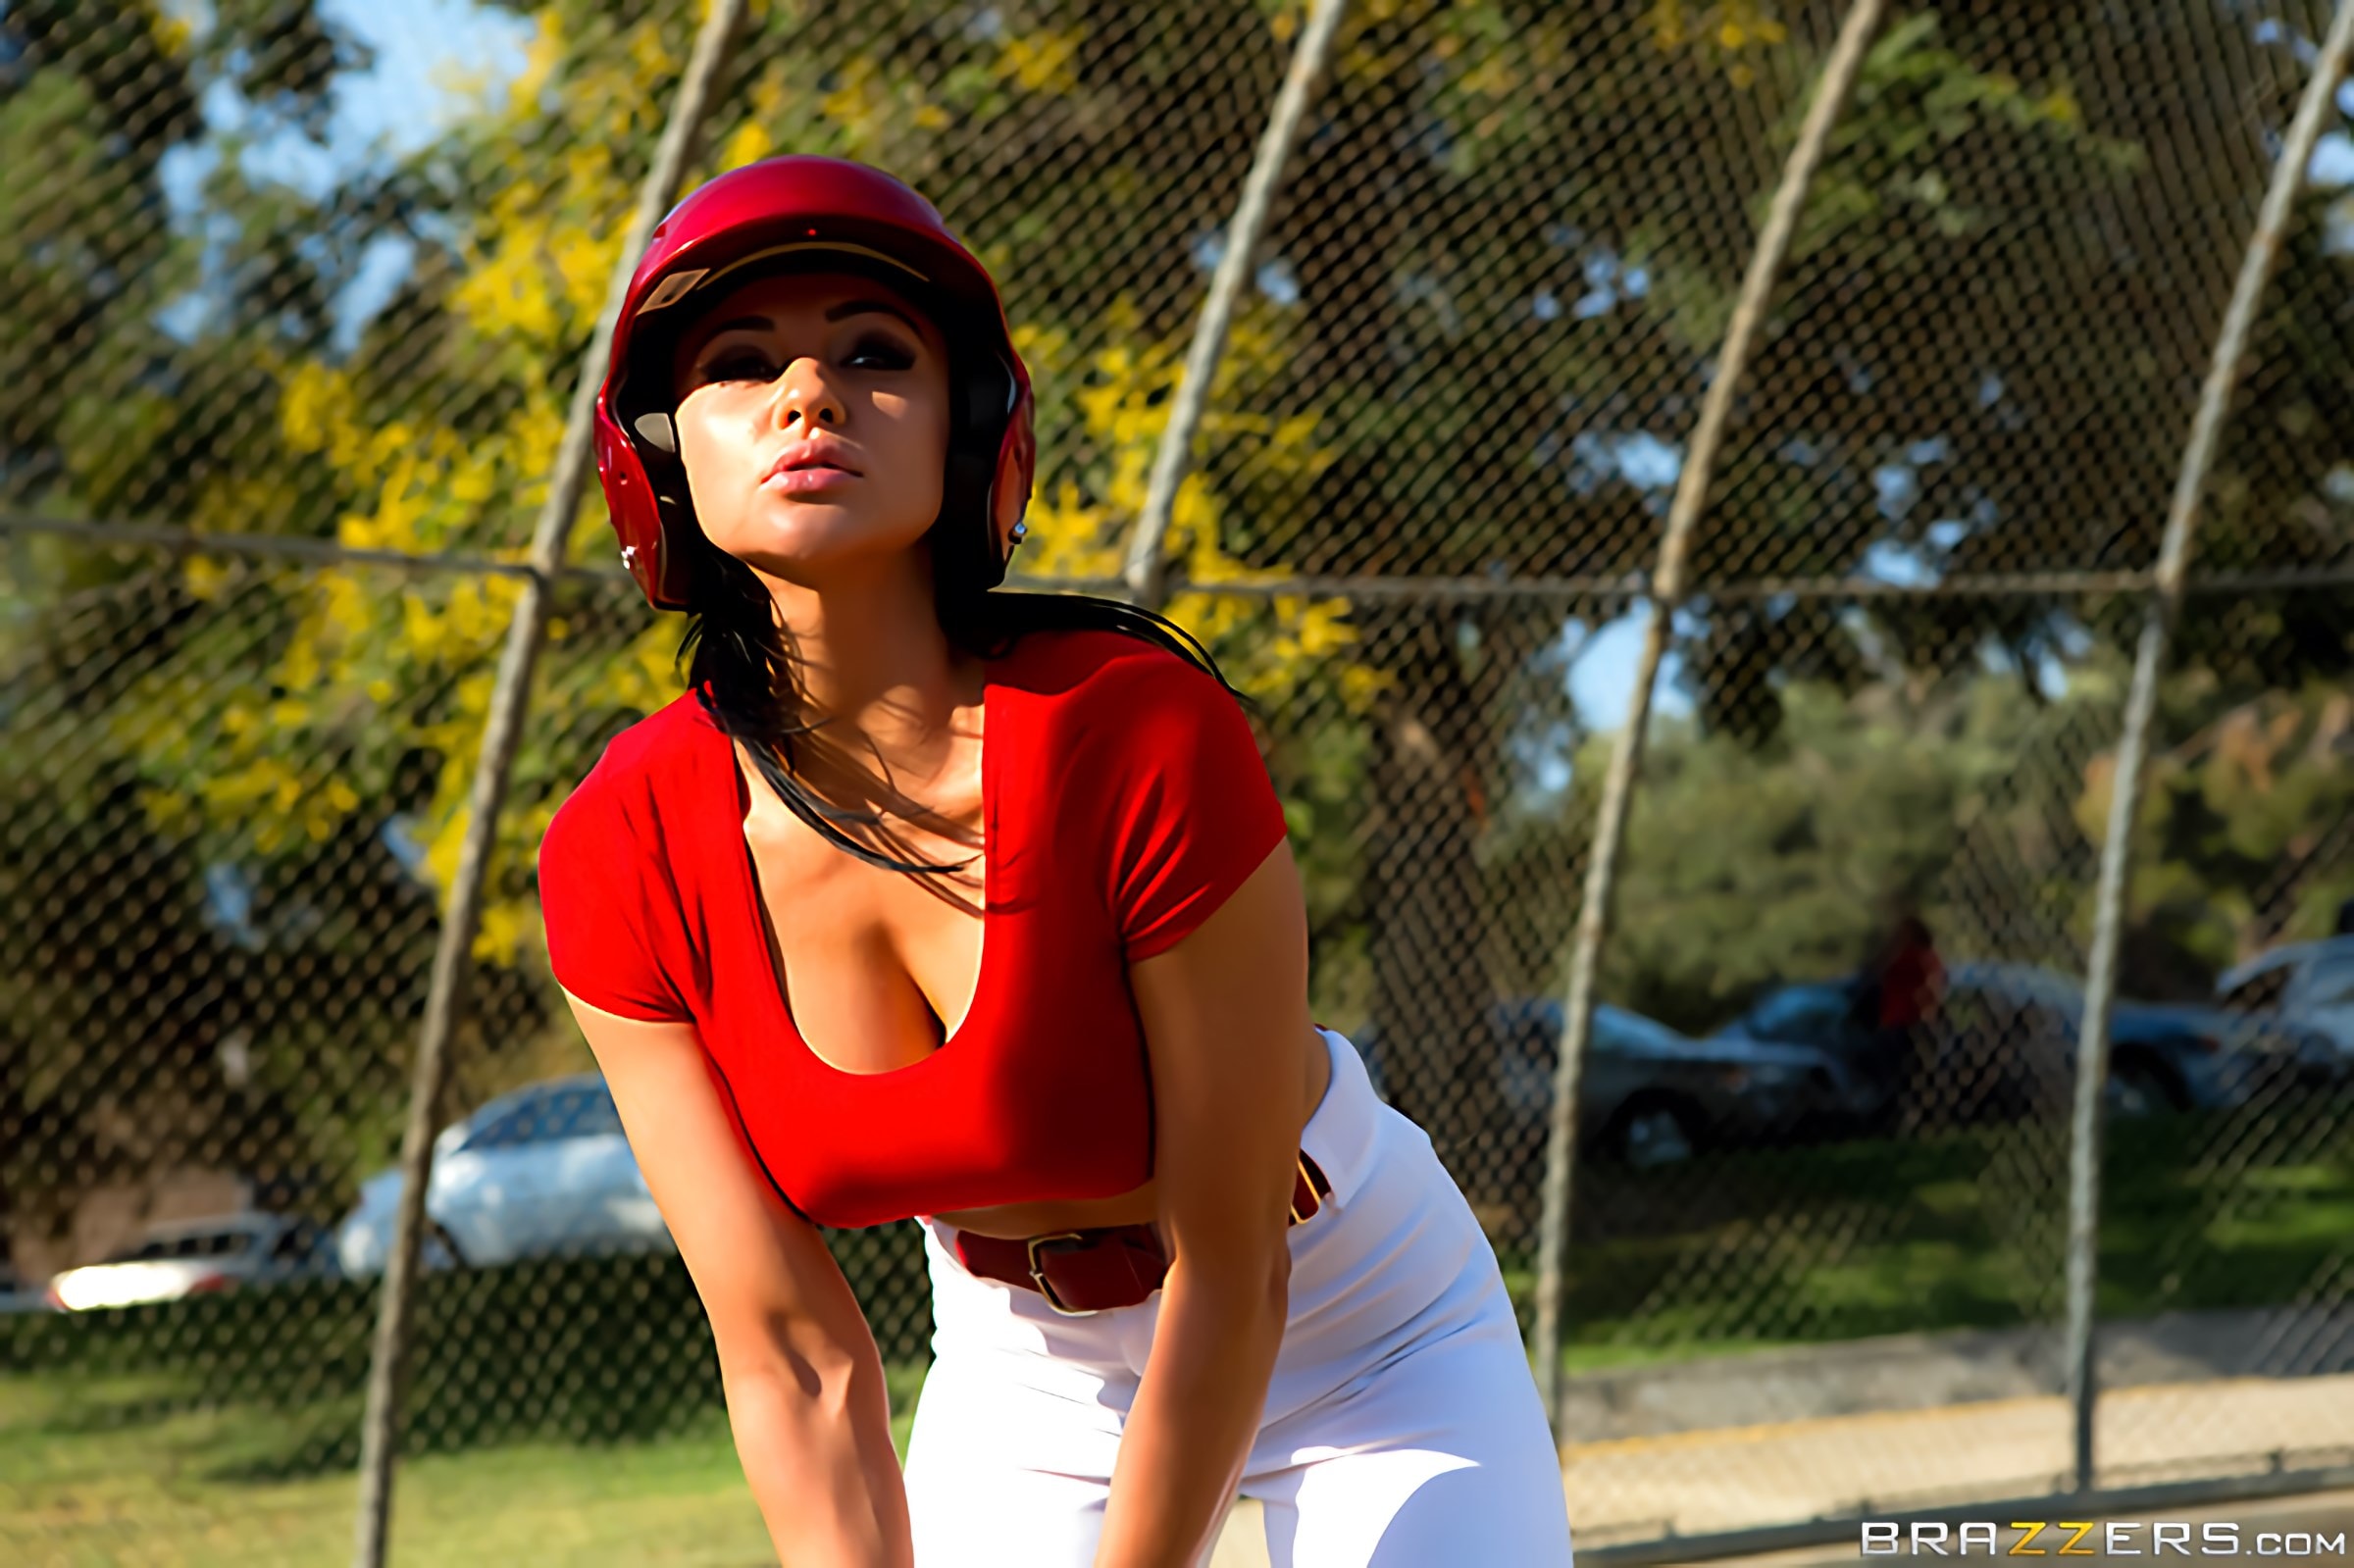 Brazzers 'Audrey Gets the Batter Up' starring Audrey Bitoni (Photo 7)